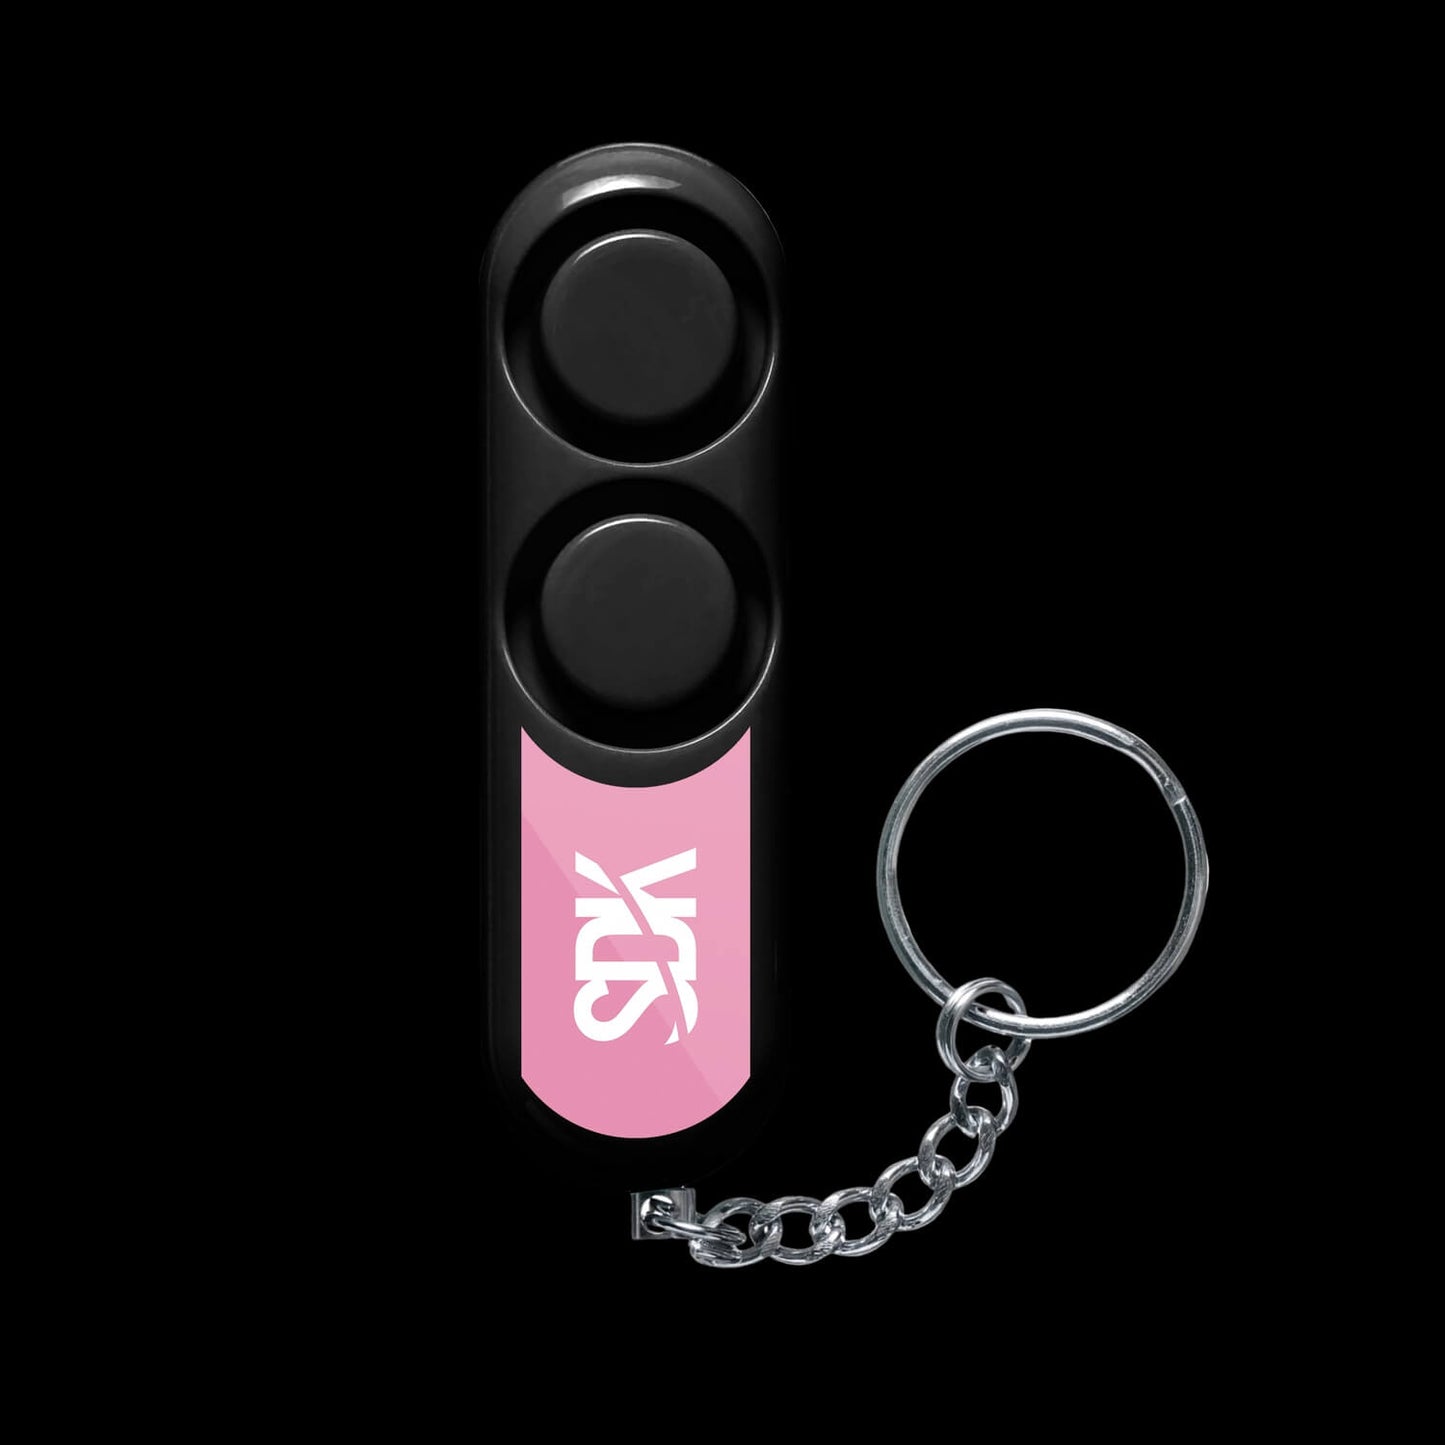 SDK Kit Pink Personal Safety Alarm (120db loud sound personal alarm which activates with pin removal)